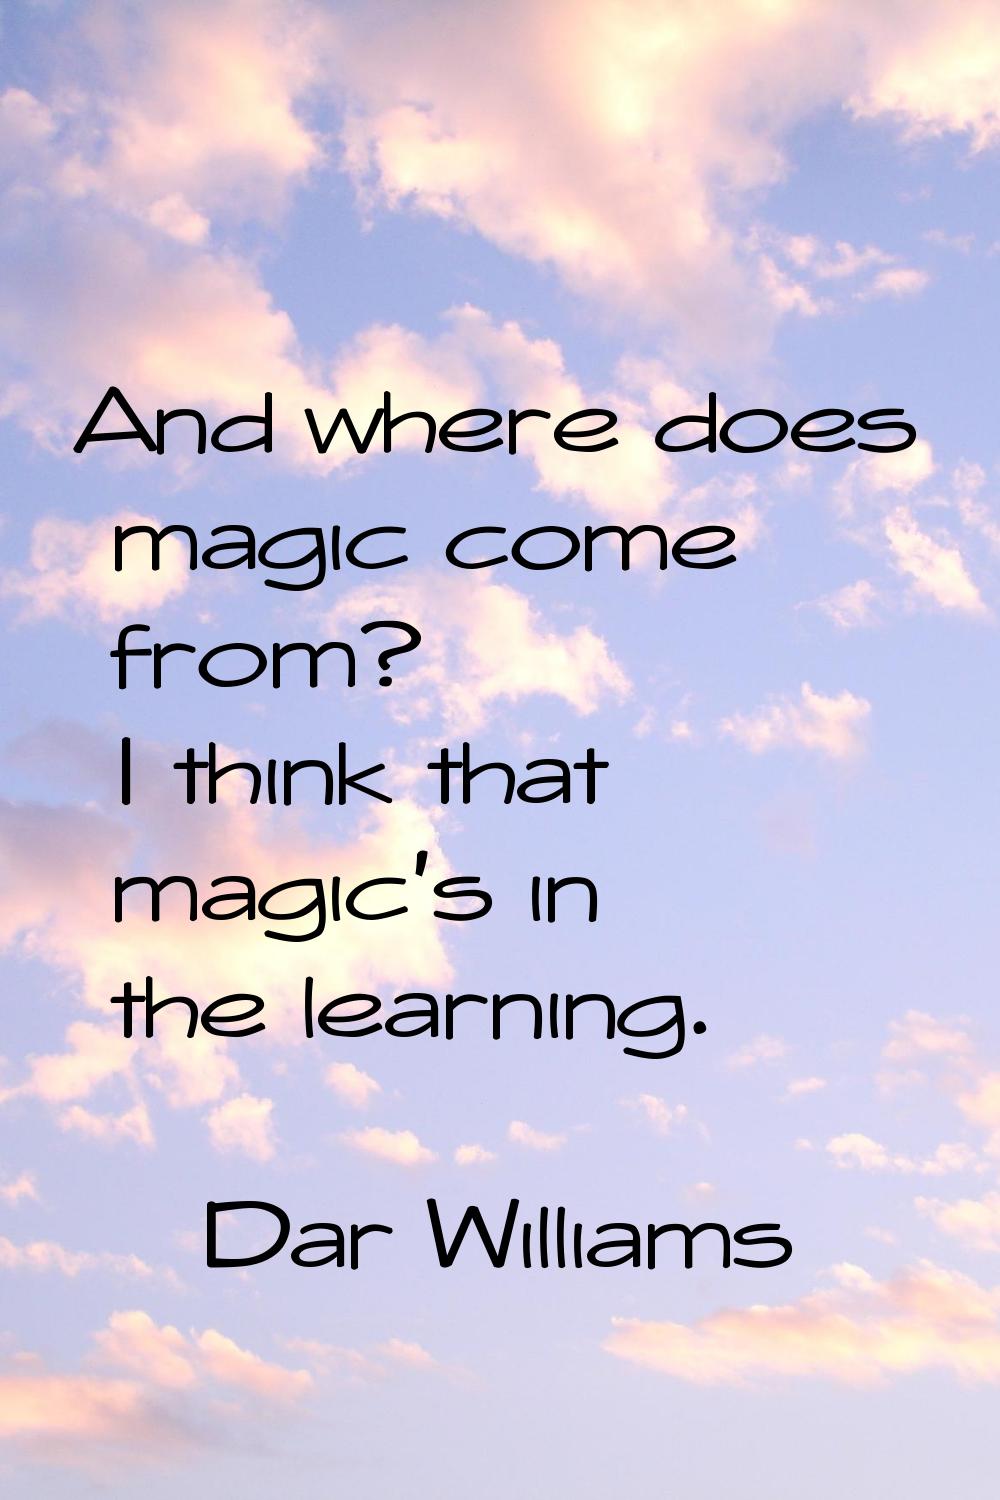 And where does magic come from? I think that magic's in the learning.